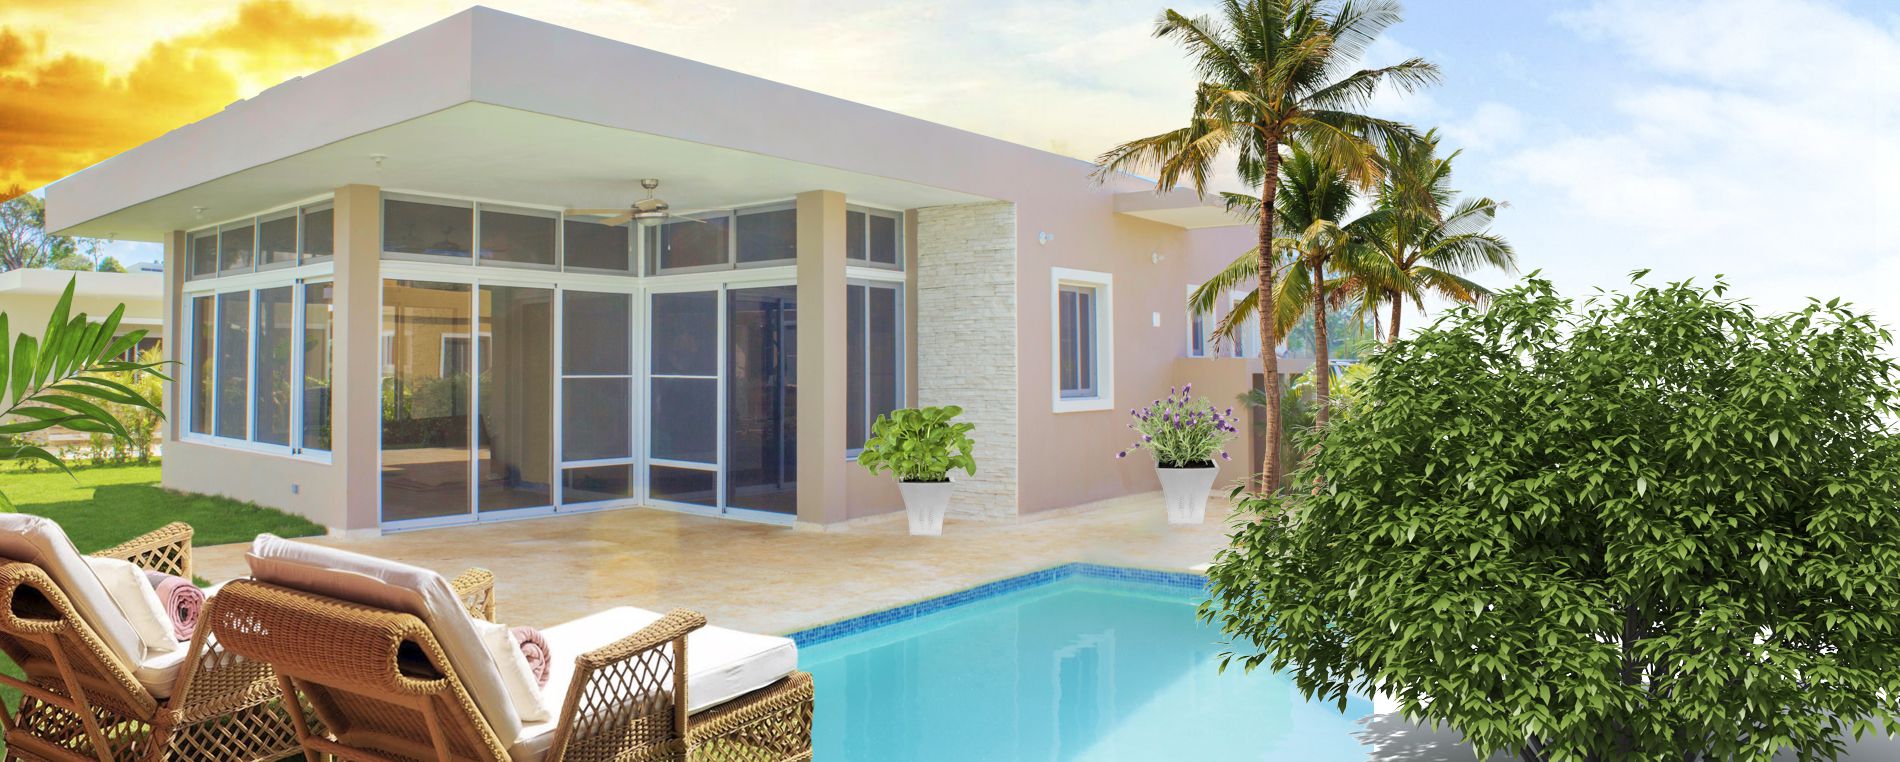 Quick Facts About Purchasing a Home in the Dominican Republic